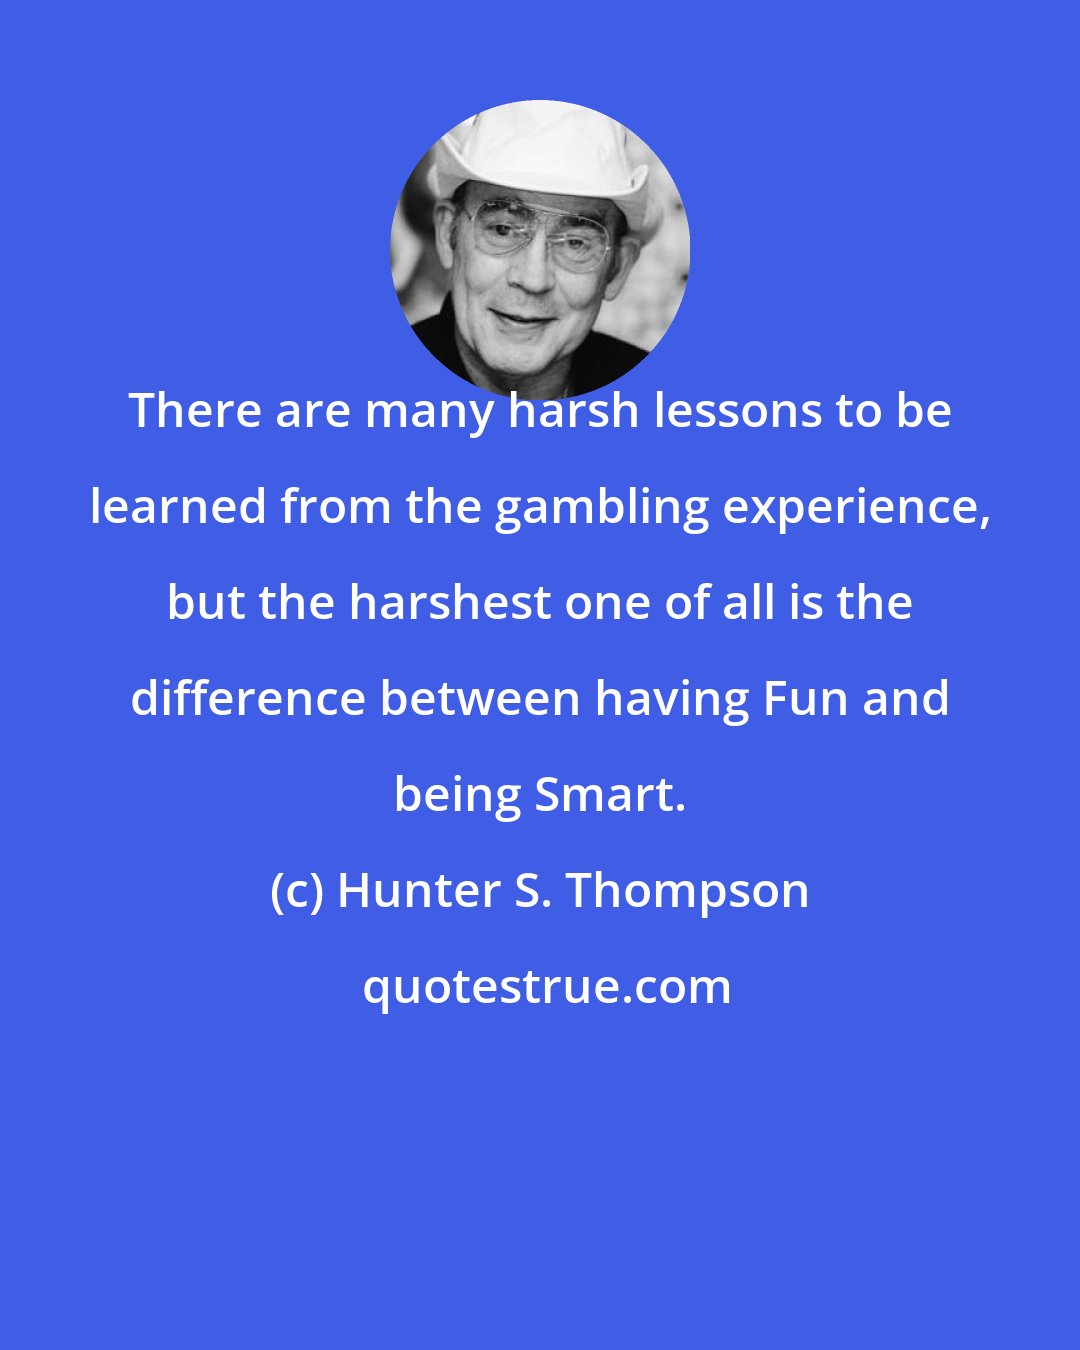 Hunter S. Thompson: There are many harsh lessons to be learned from the gambling experience, but the harshest one of all is the difference between having Fun and being Smart.